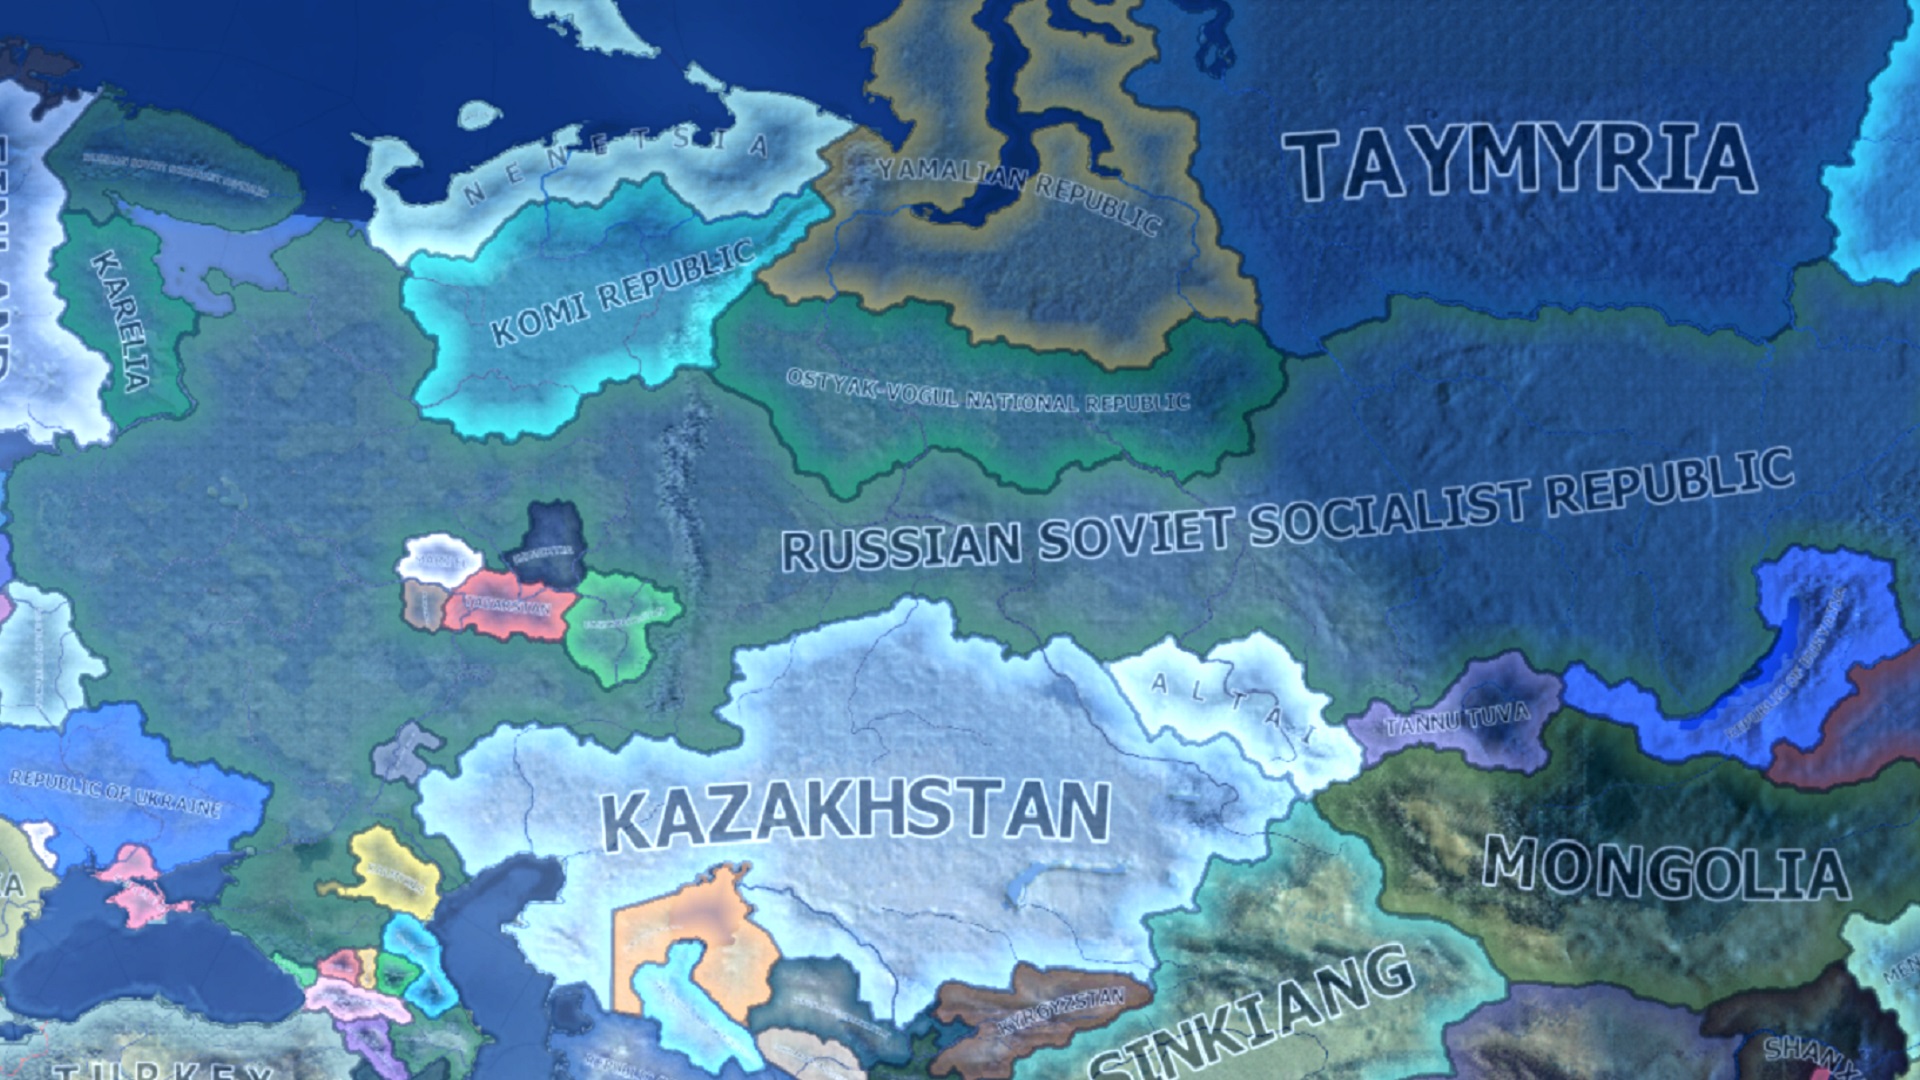 Hearts of Iron 4’s next DLC will let you split Soviet Russia into 29 separate entities